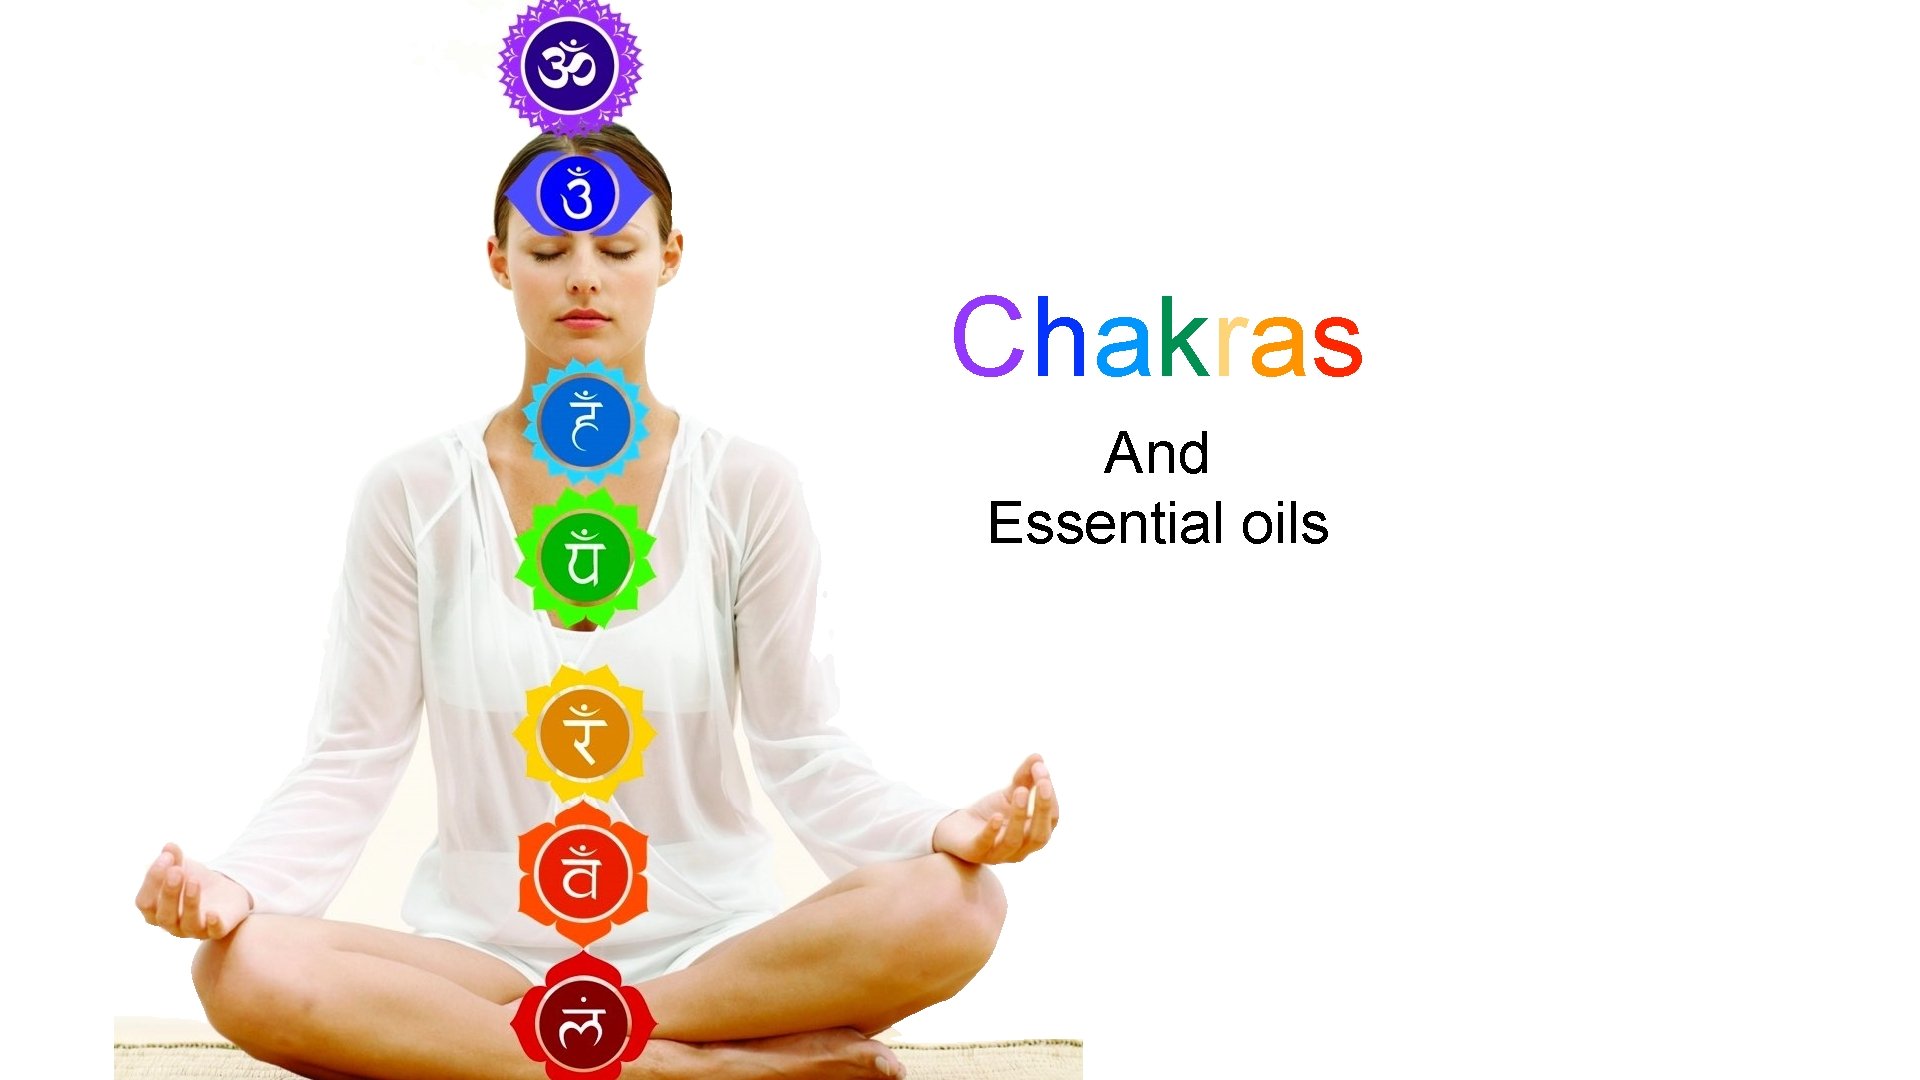 Chakras And Essential oils 